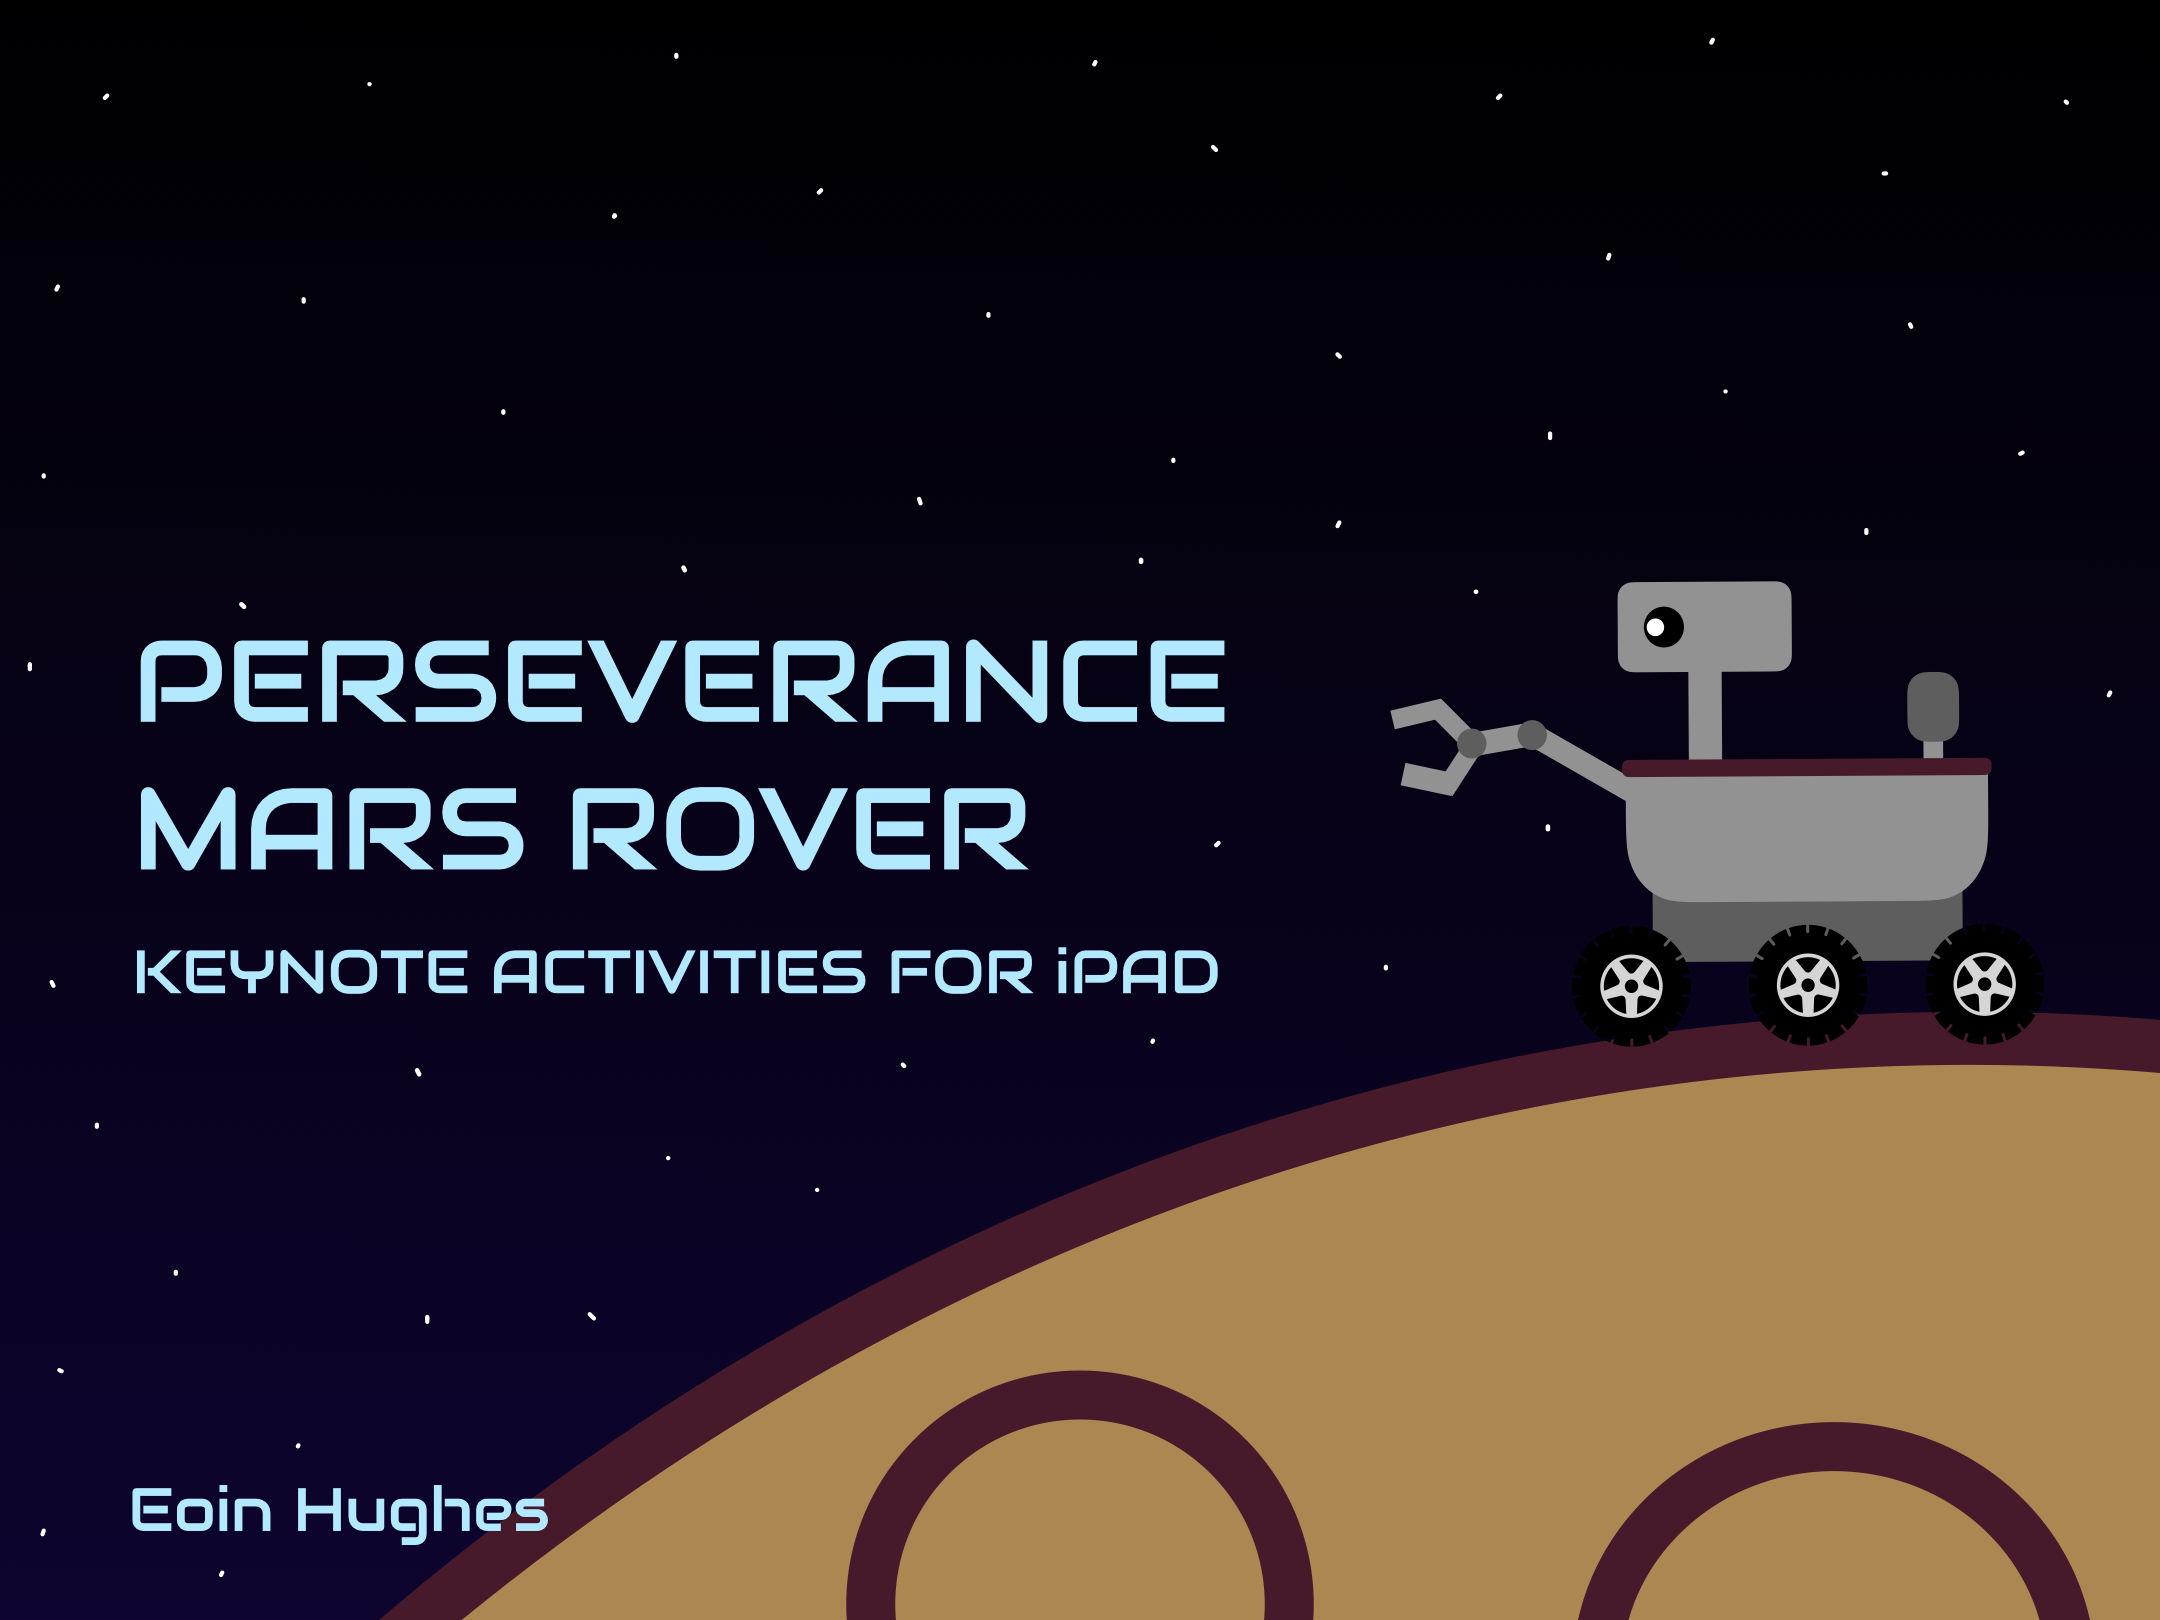 Cover of Perseverance Mars Rover - Keynote Activities for iPad. Cartoon-like Mars Rover on Mars against background of space.